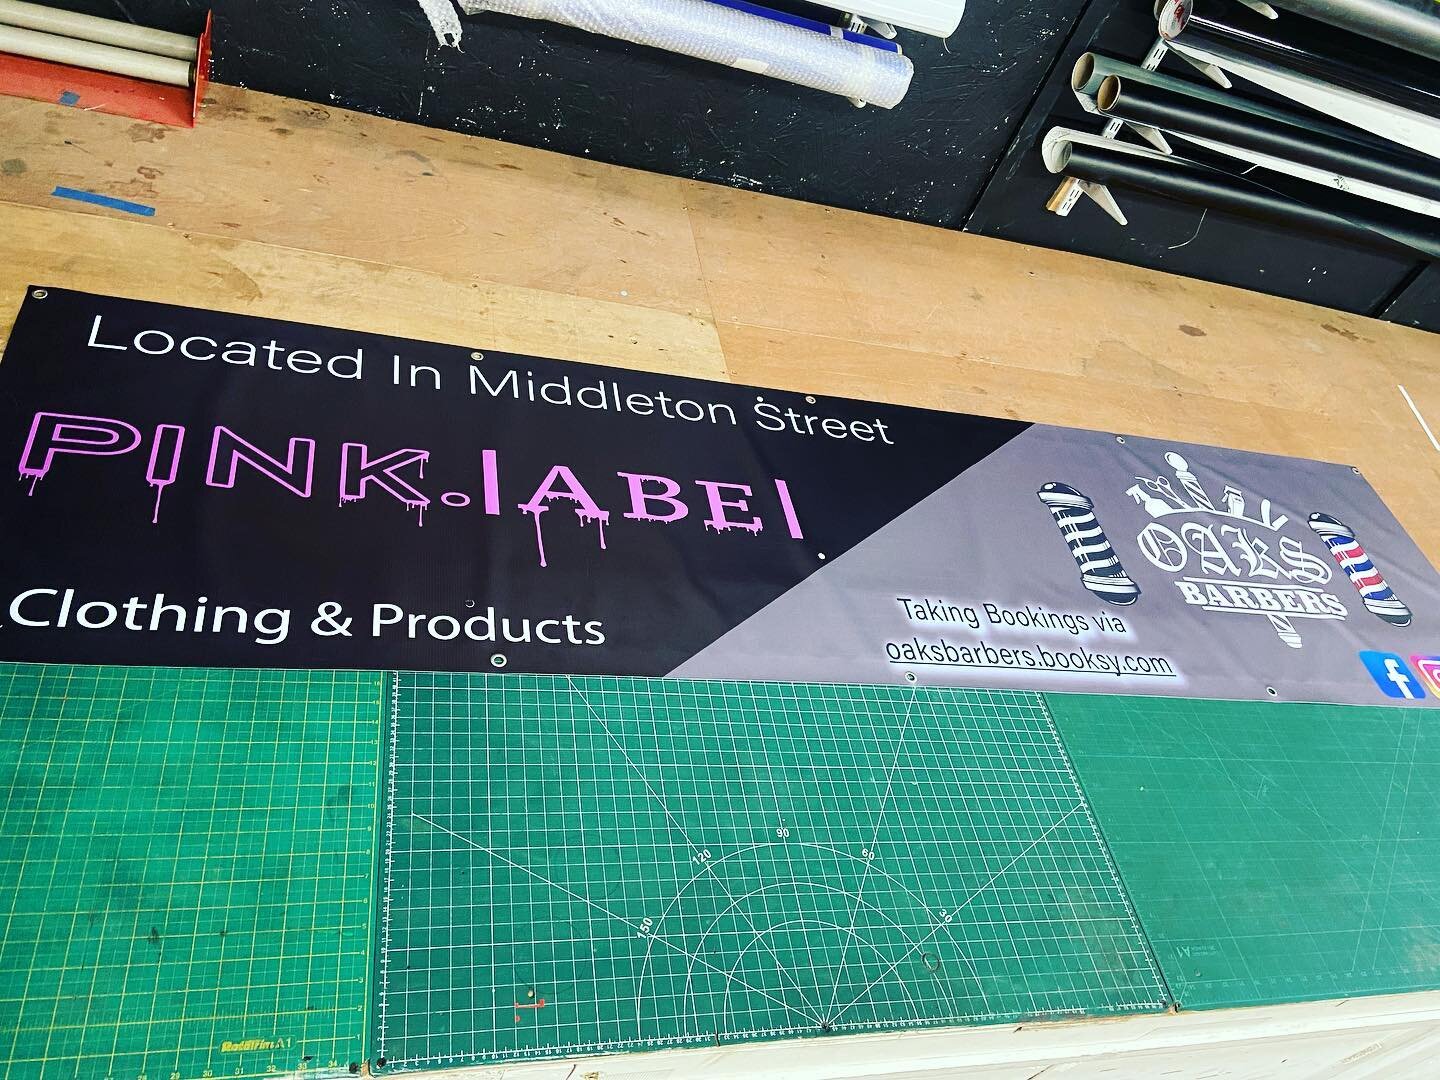 📌 8x2ft Banner 📌  @oaks_barbers @pink.labe1 #signs #wales #tints